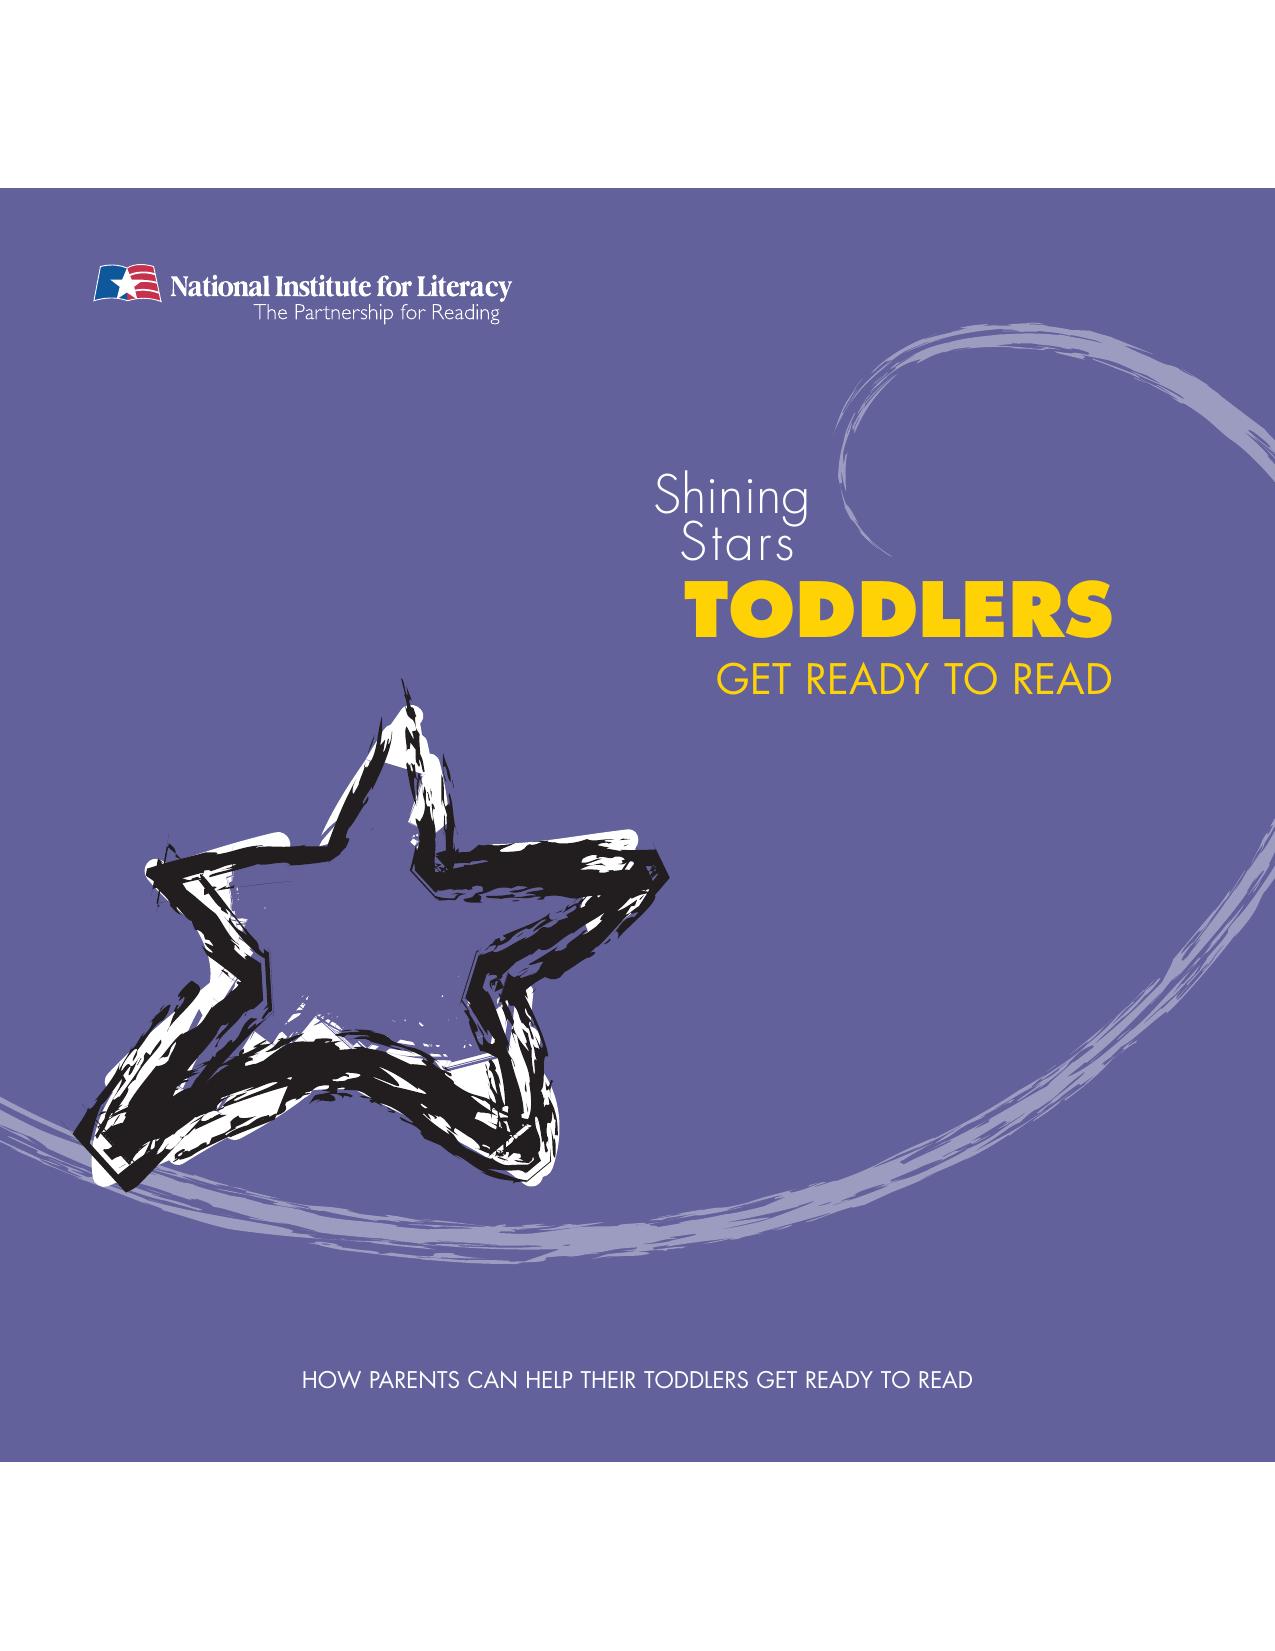 Shining Stars Toddlers Get Ready To Read